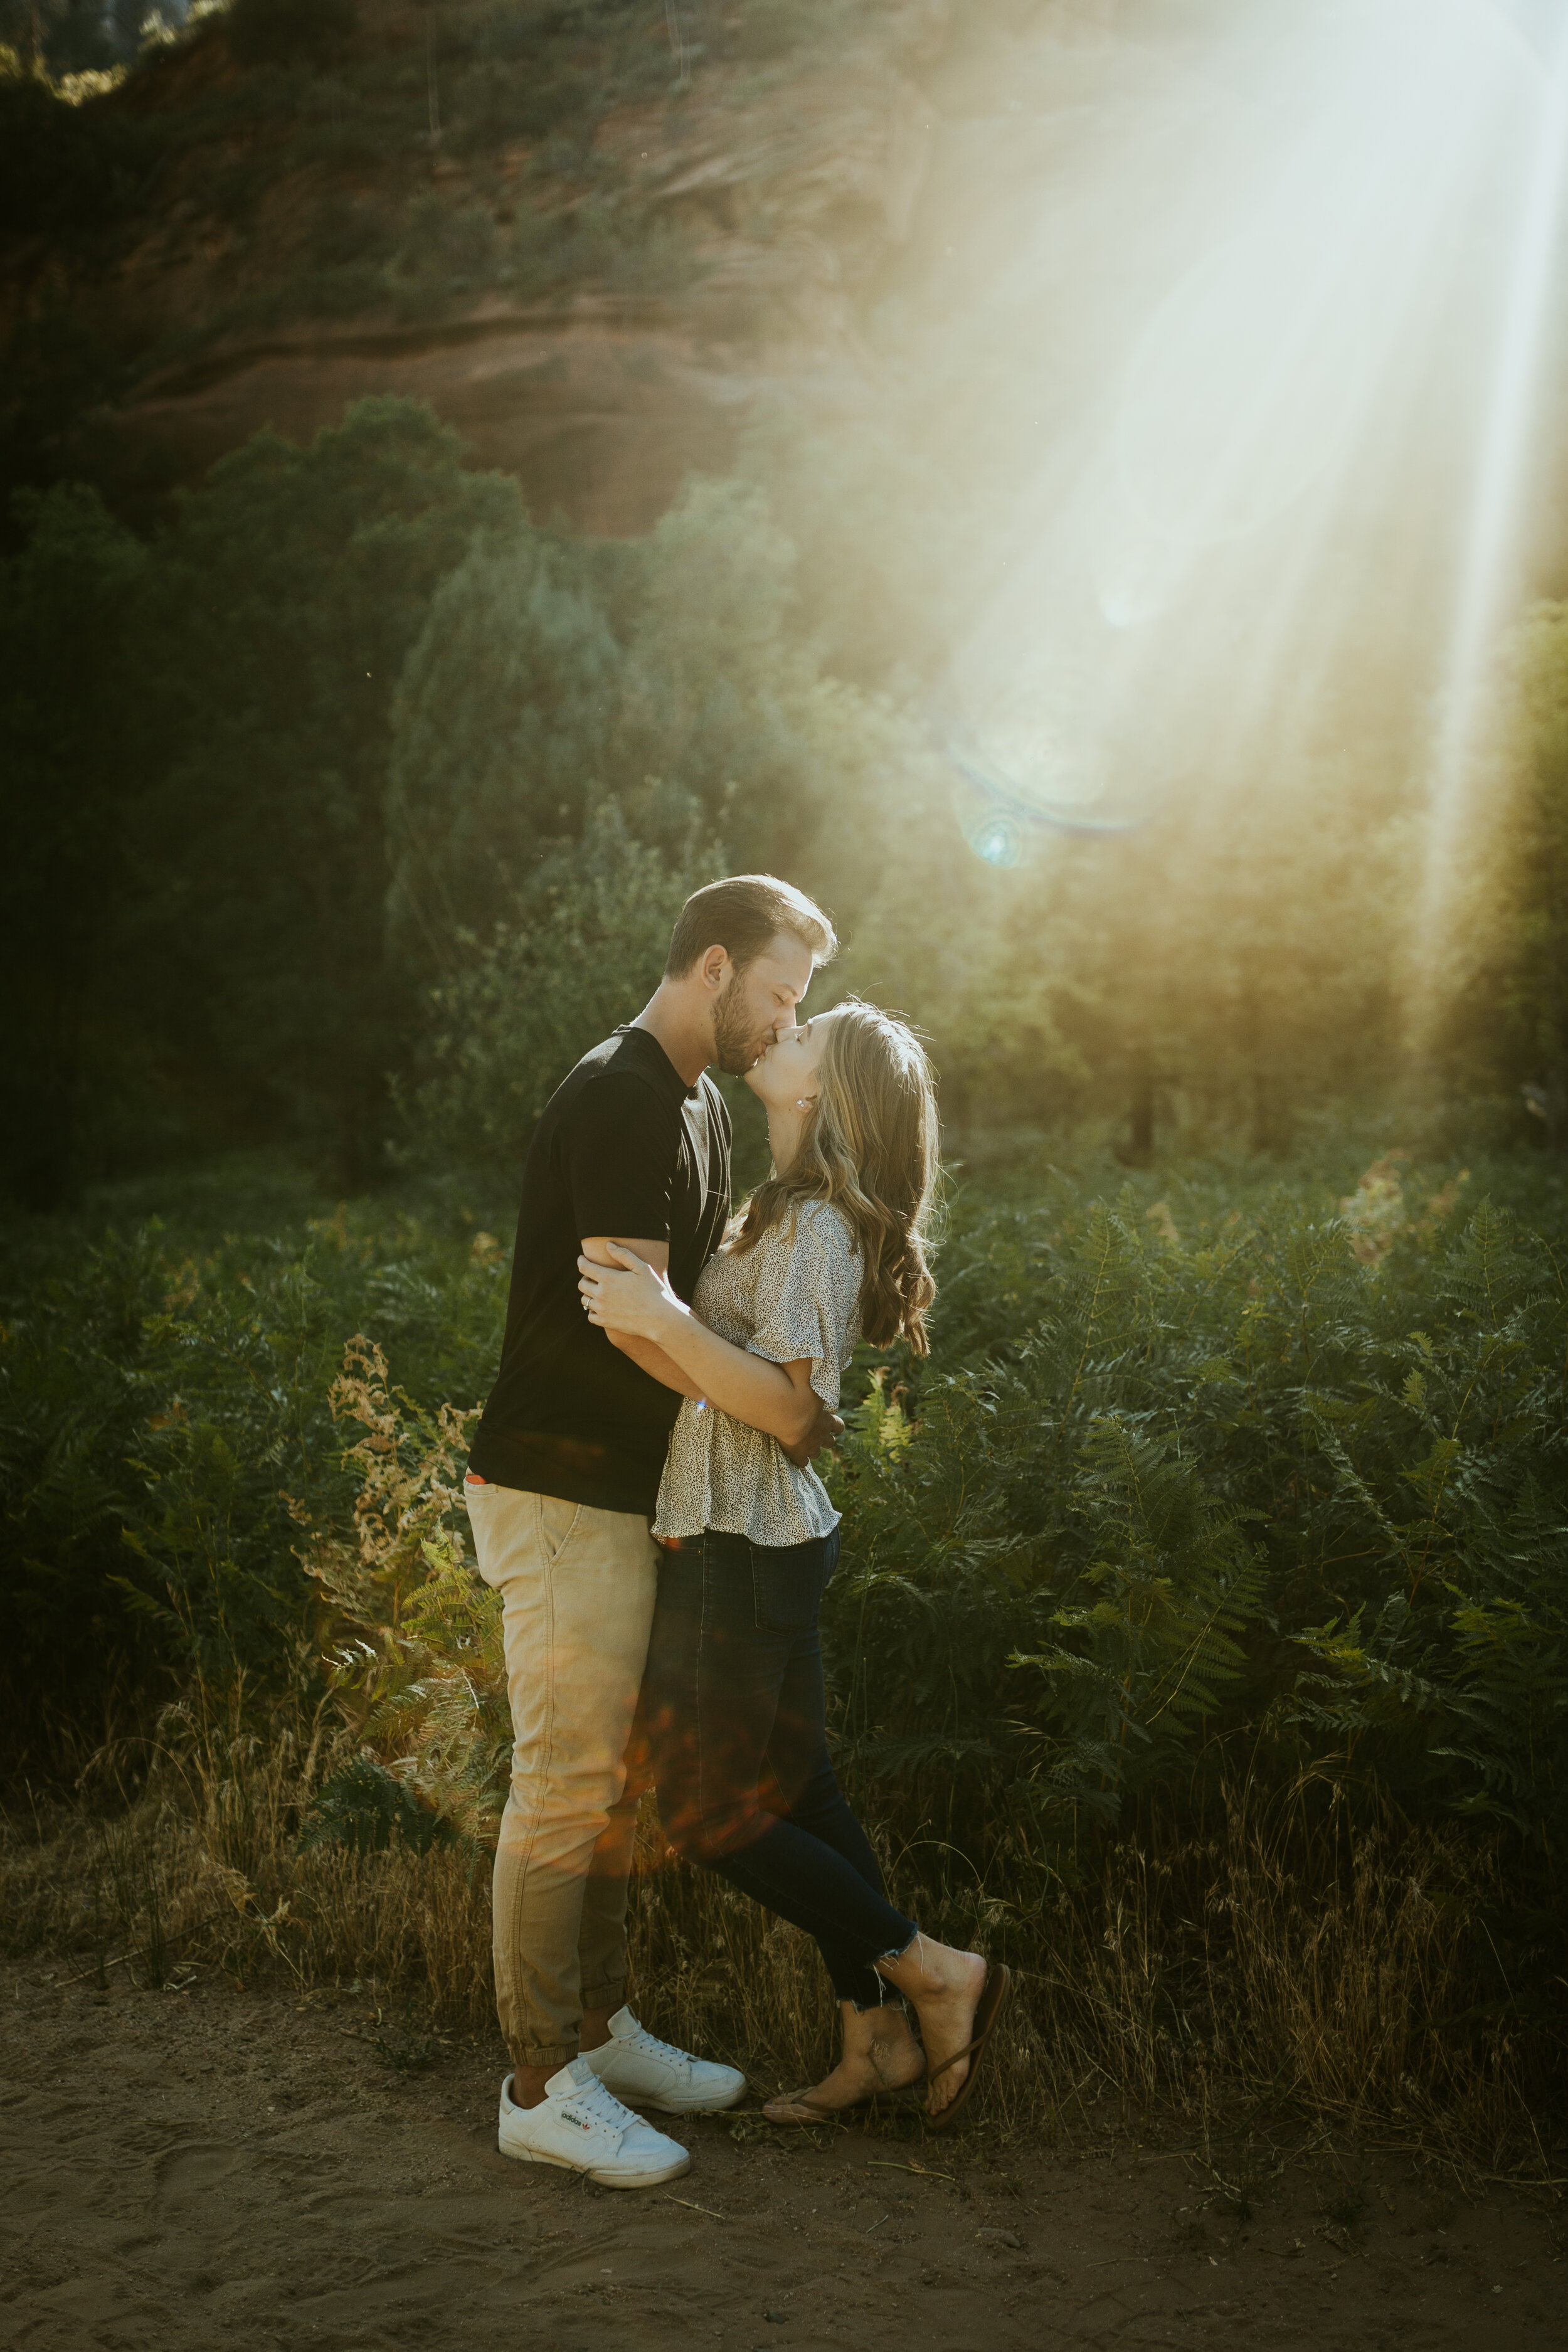 west fork sedona arizona engagement photos outfit inspiration for couples casual summer clothing-1.jpg